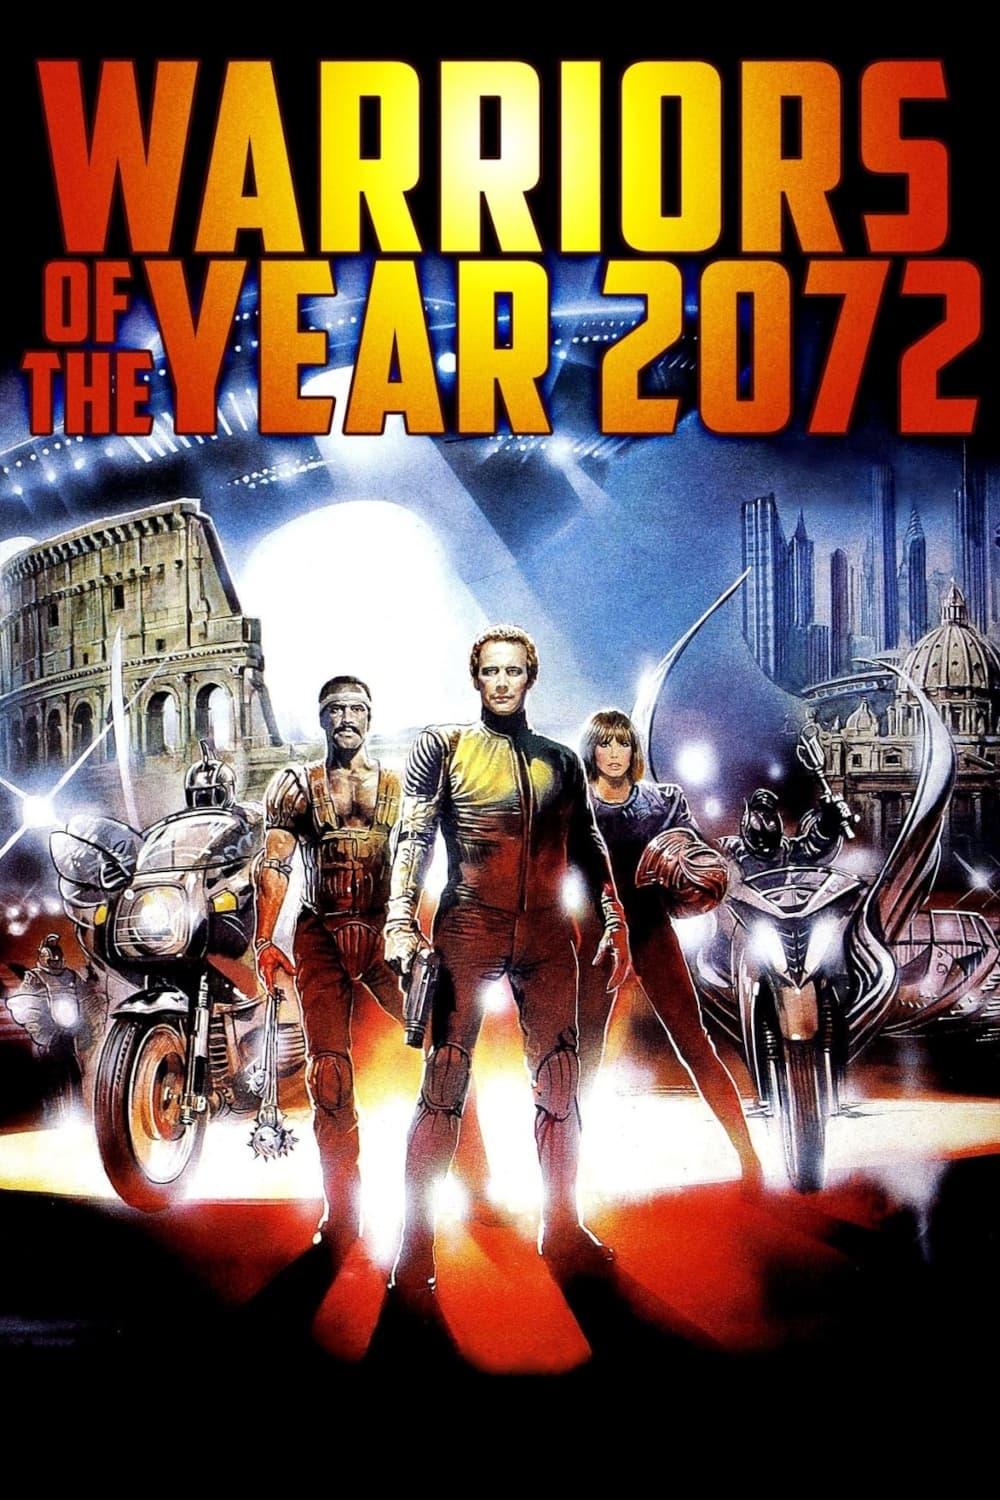 Warriors of the Year 2072 poster